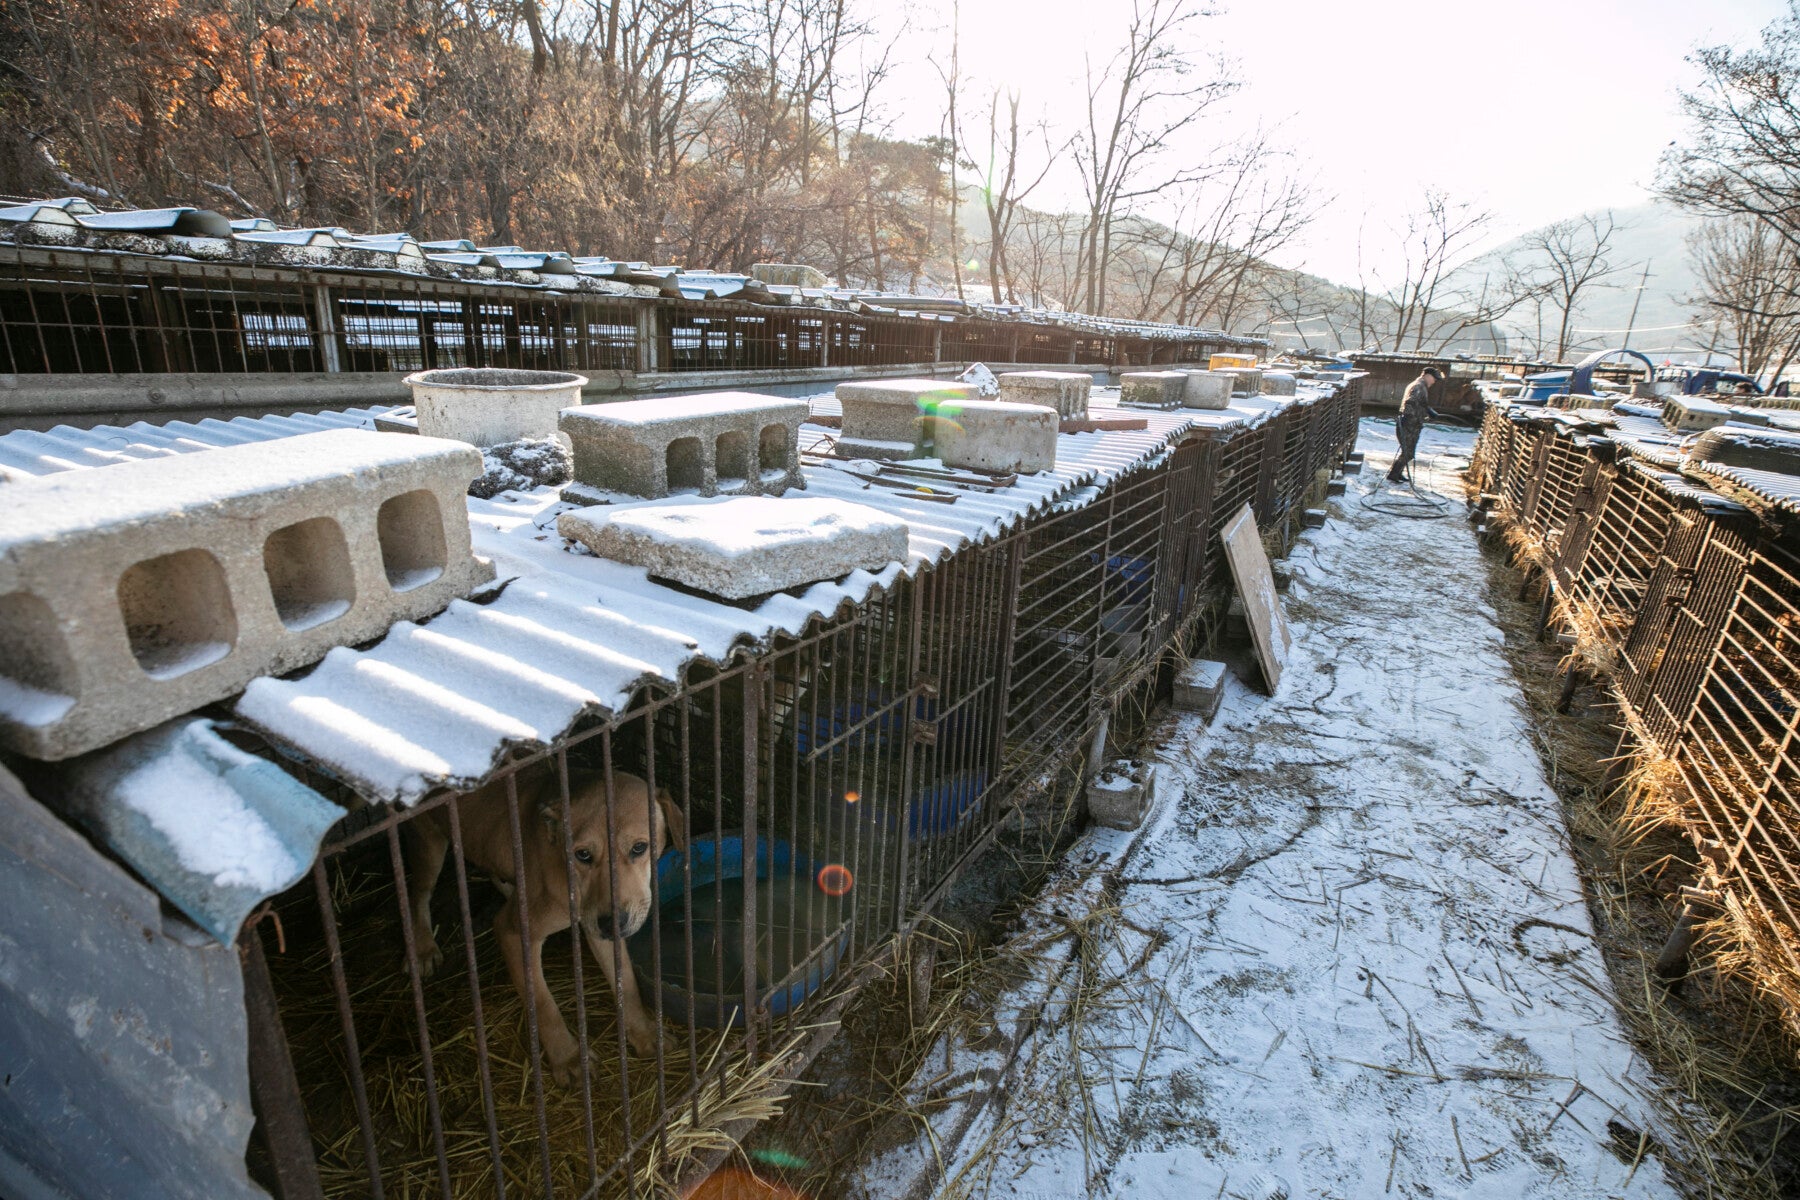 Removing dogs from a dog meat farm